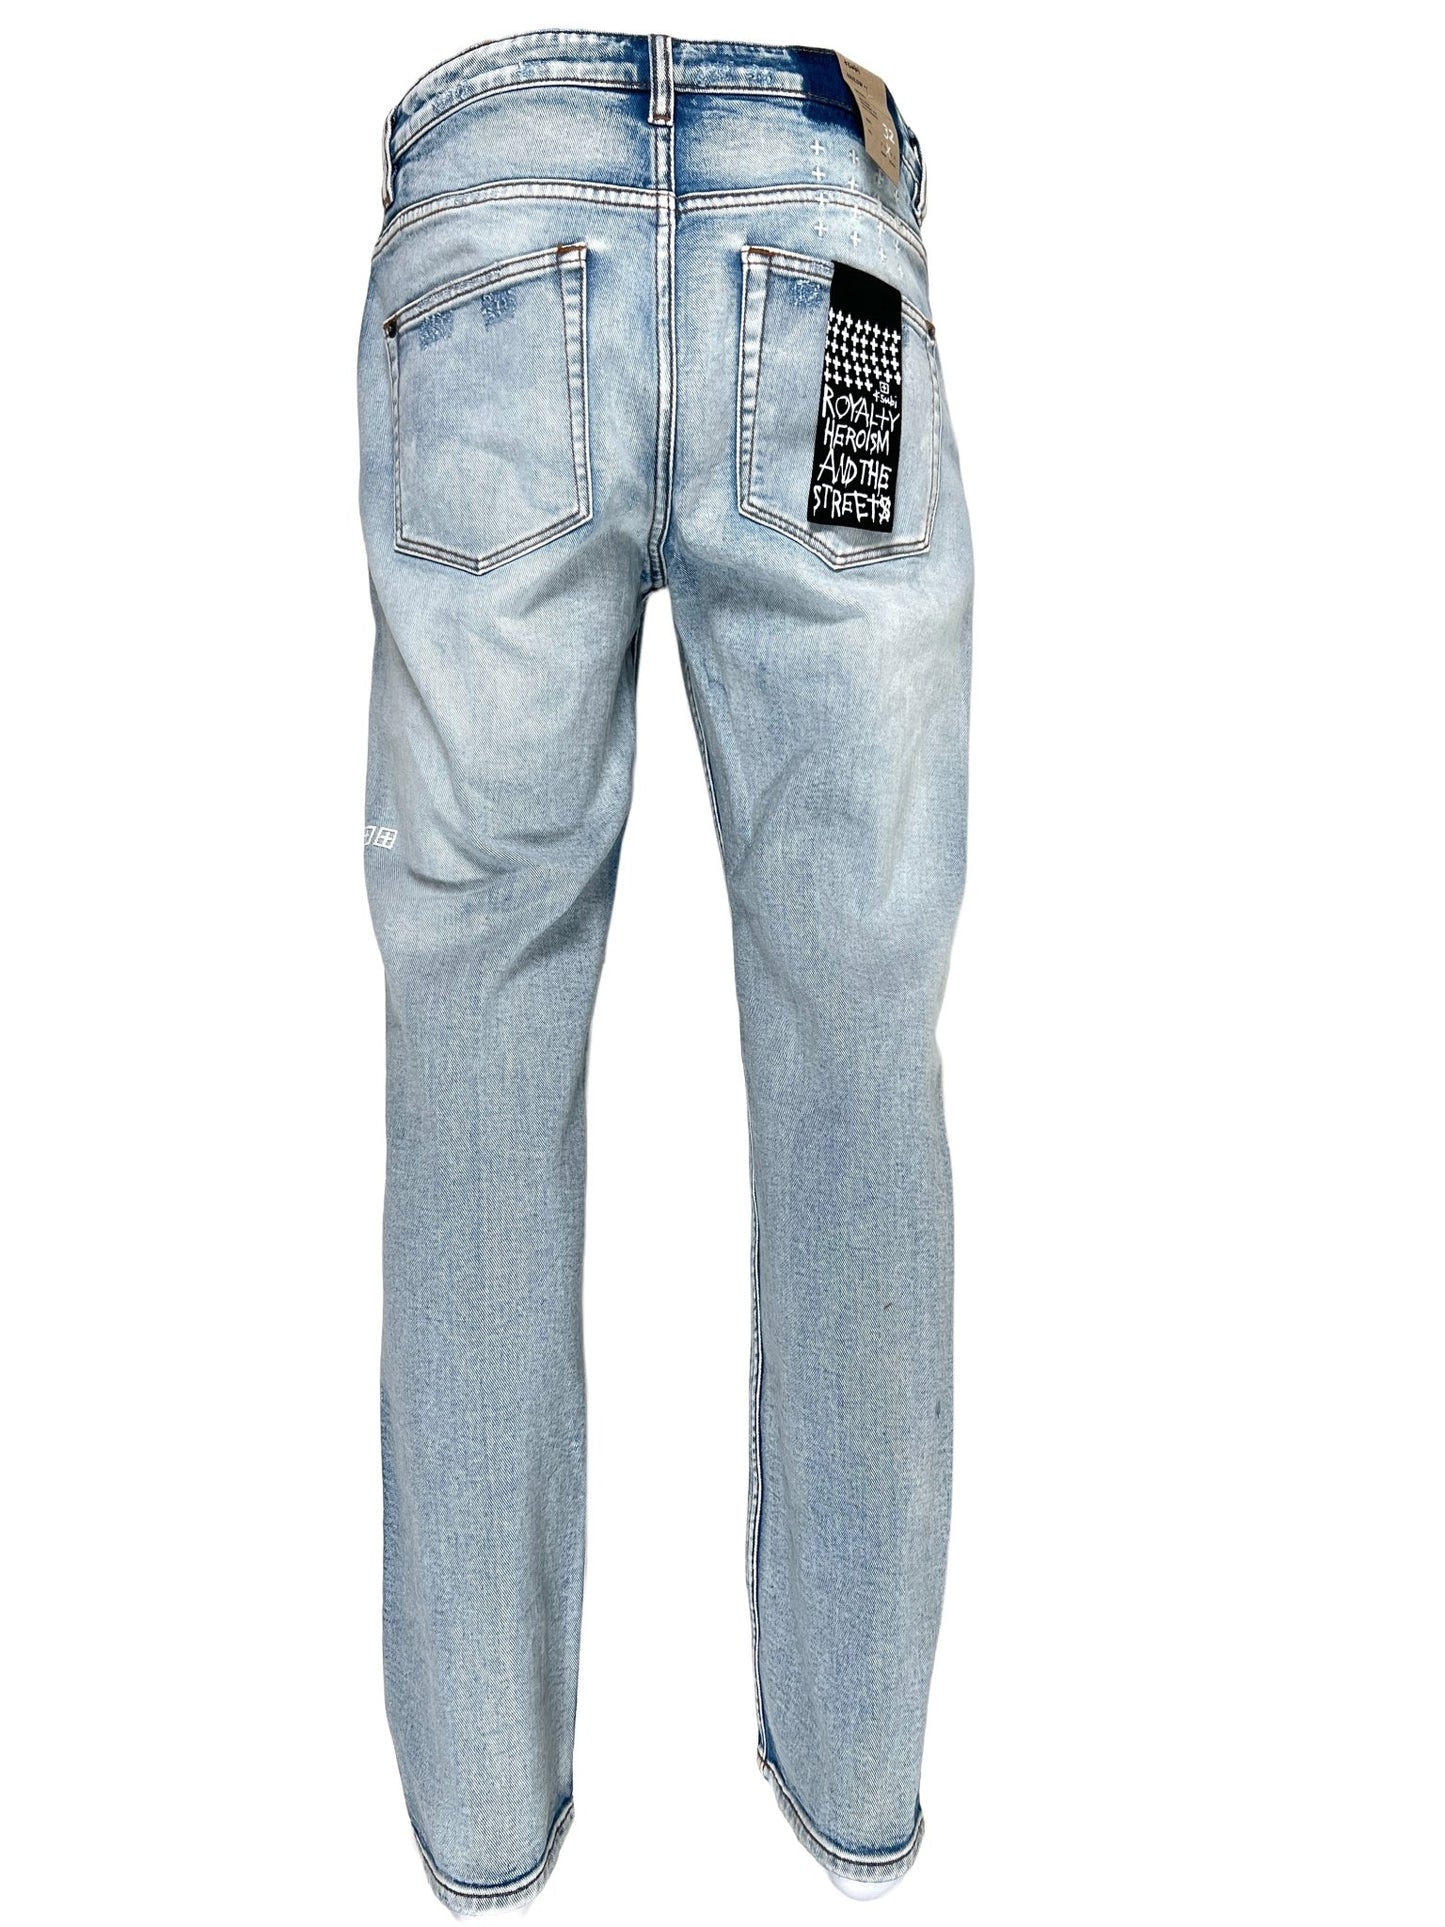 A pair of men's ripped jeans with KSUBI HAZLOW CITY HIGH TRASHED DENIM tag on the back.